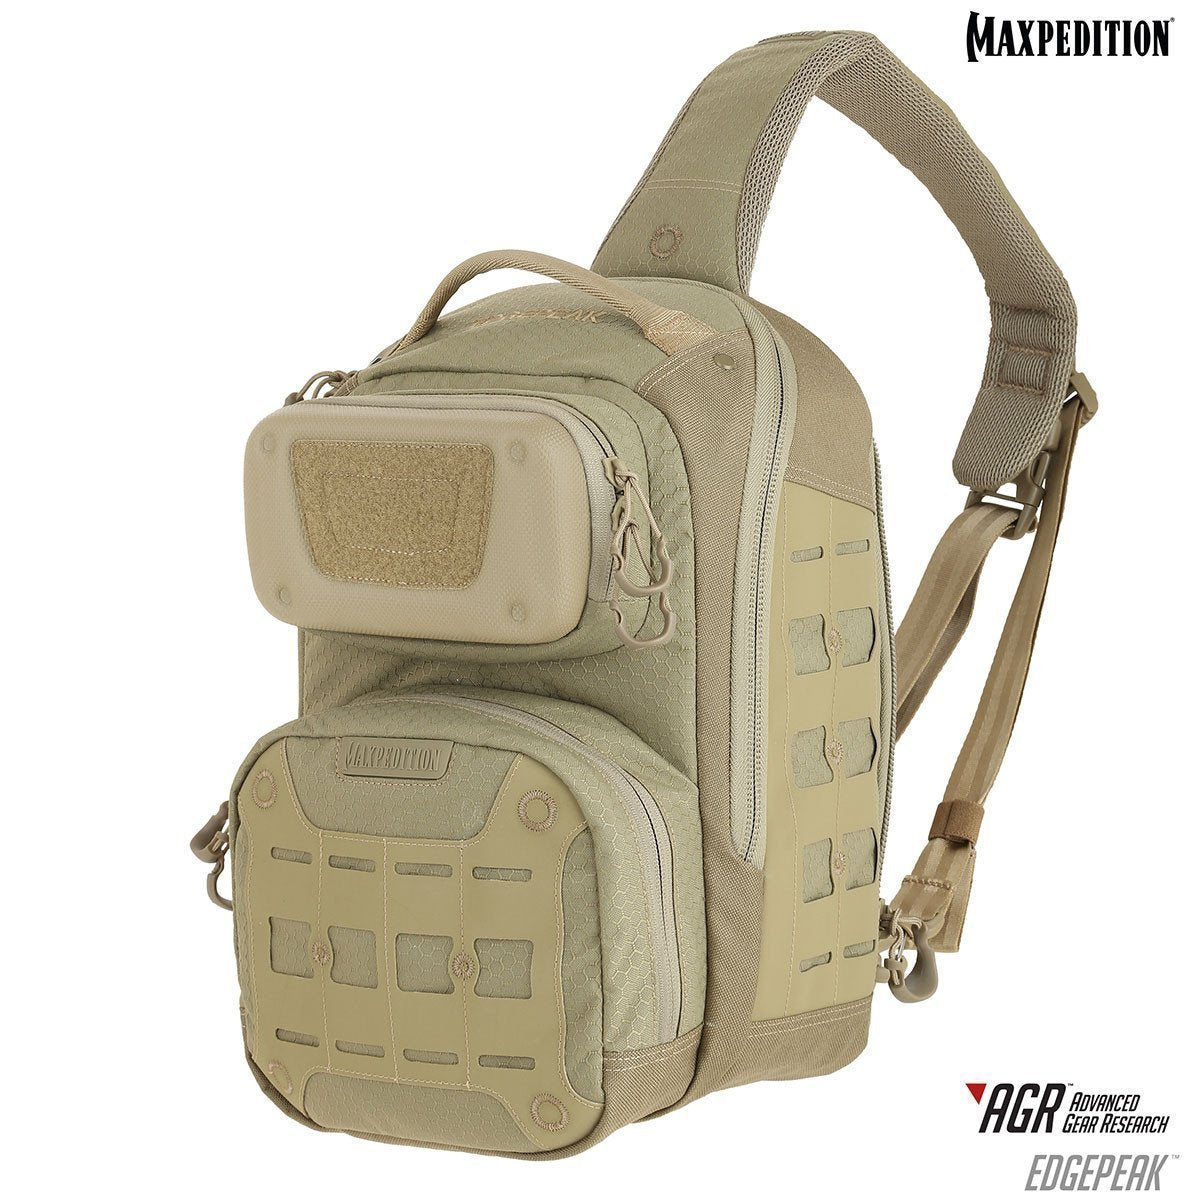 Edgepeak™ Ambidextrous Sling Pack | Maxpedition Tactical Gear